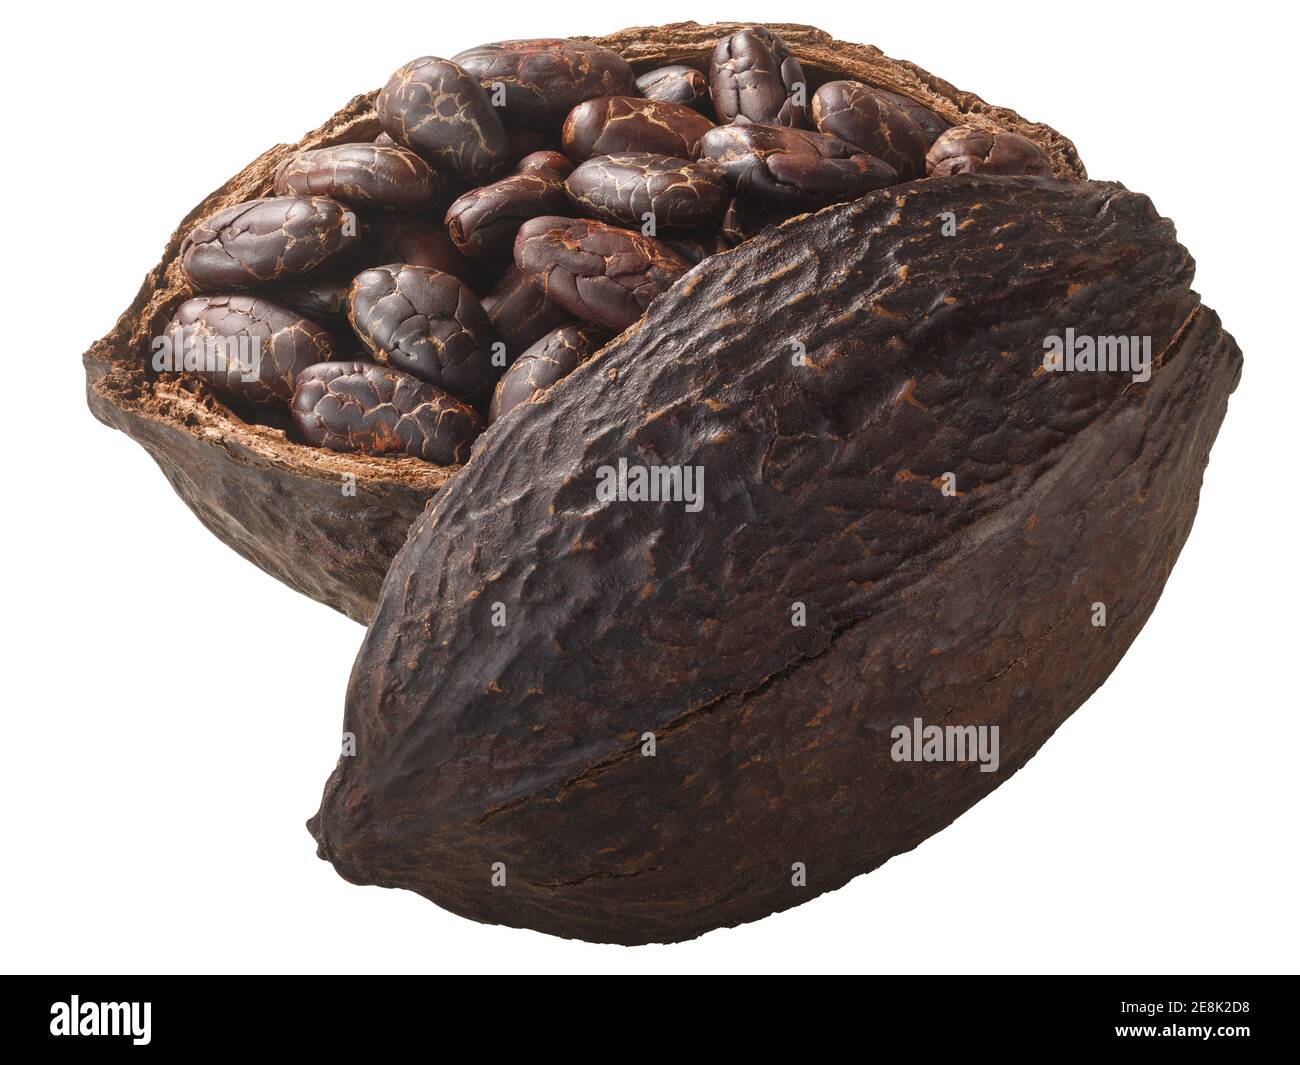 Halved cocoa pod with whole fermented cacao beans (Theobroma cacao fruit w seeds) isolated Stock Photo